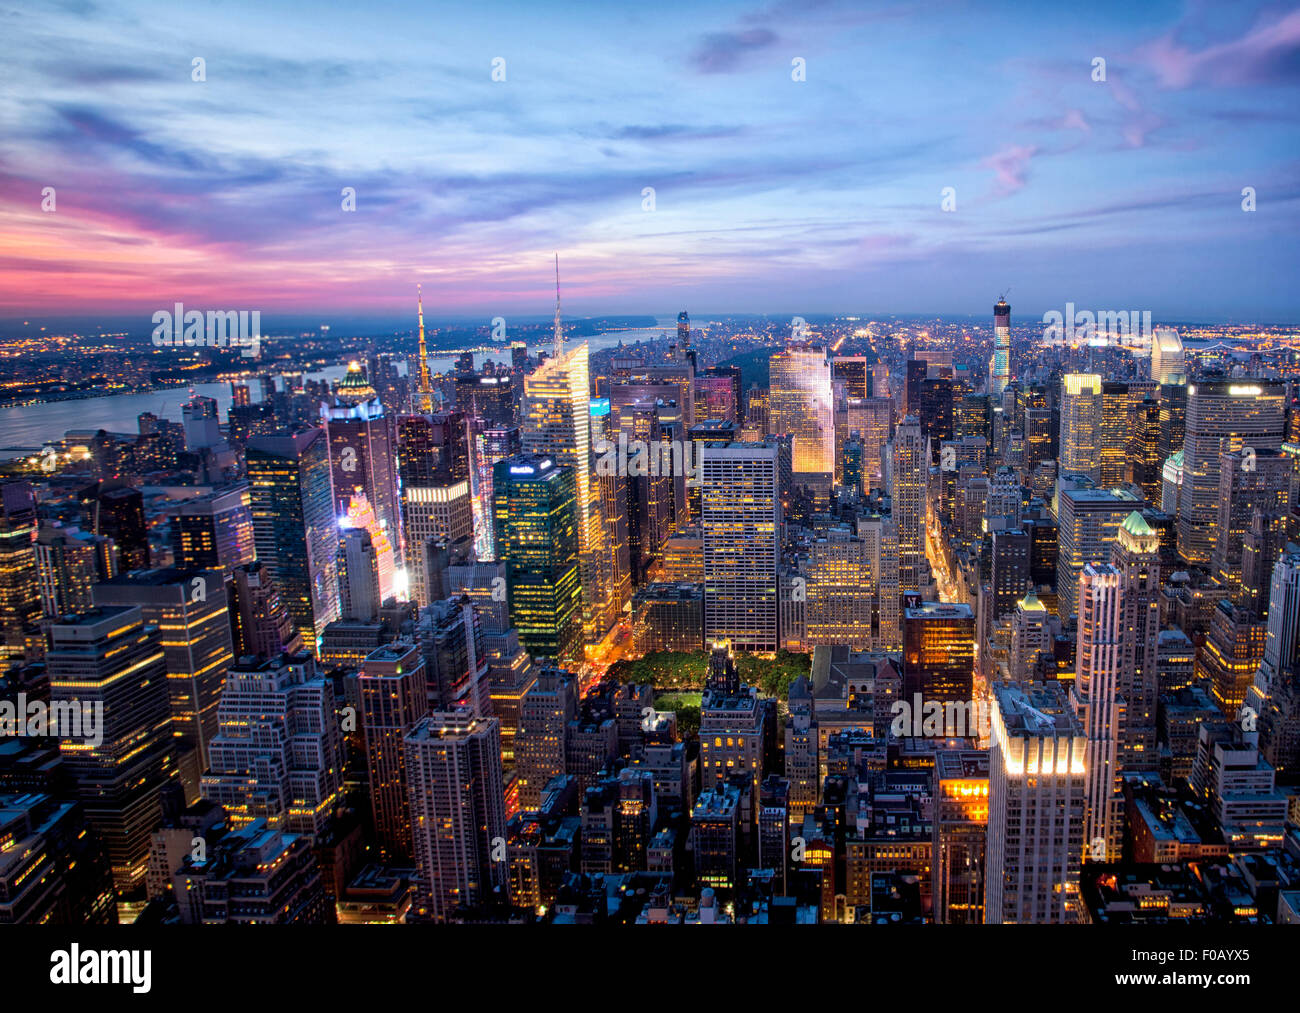 New York sunset skyline taken from the Empire State Building Stock Photo